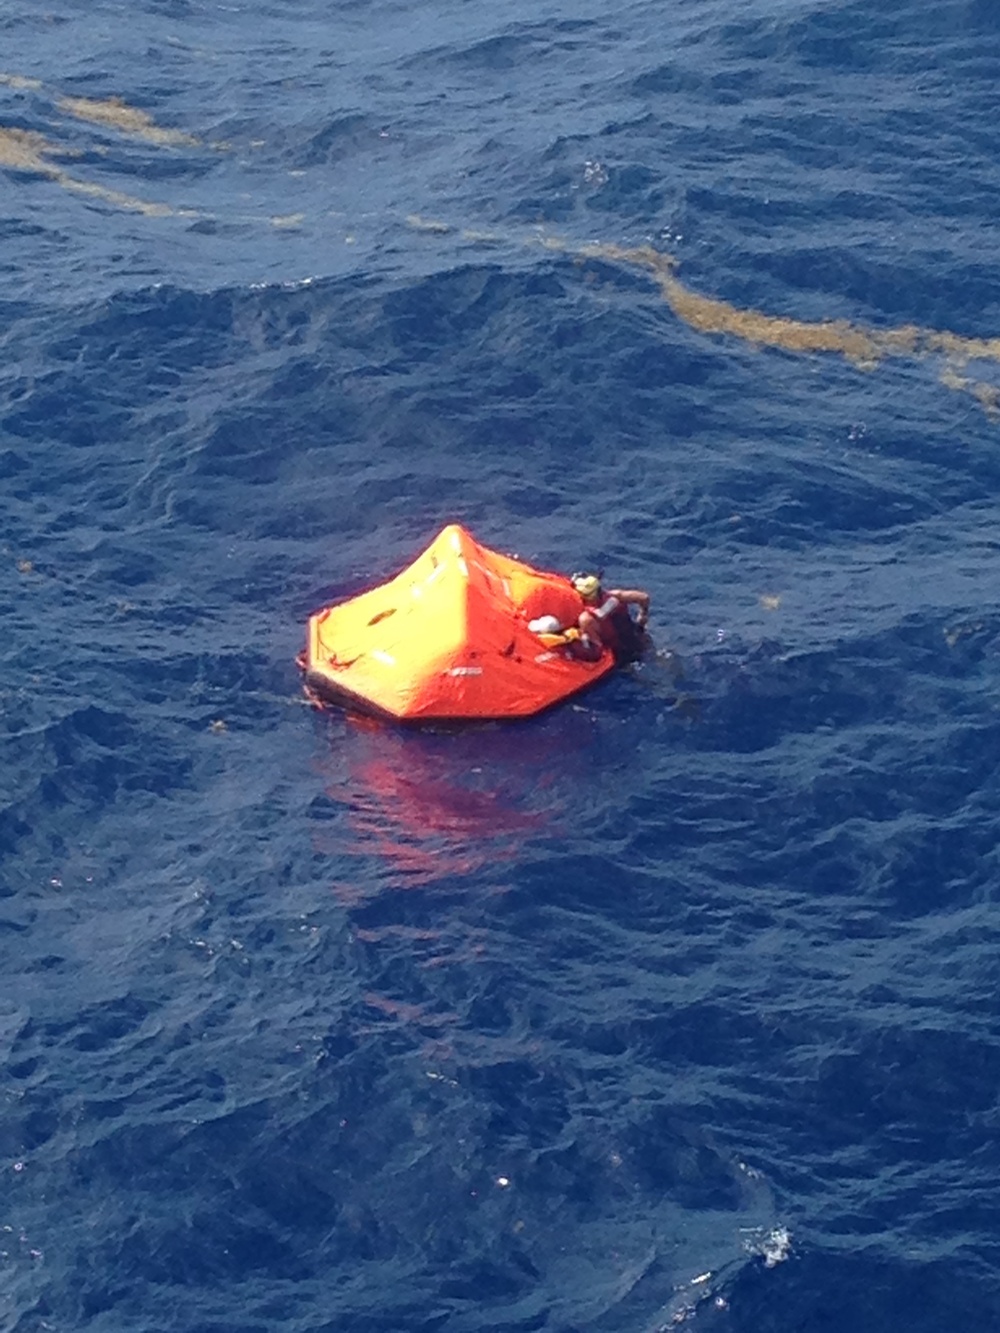 The Coast Guard rescues 2 people from water 32 miles south of St. Croix